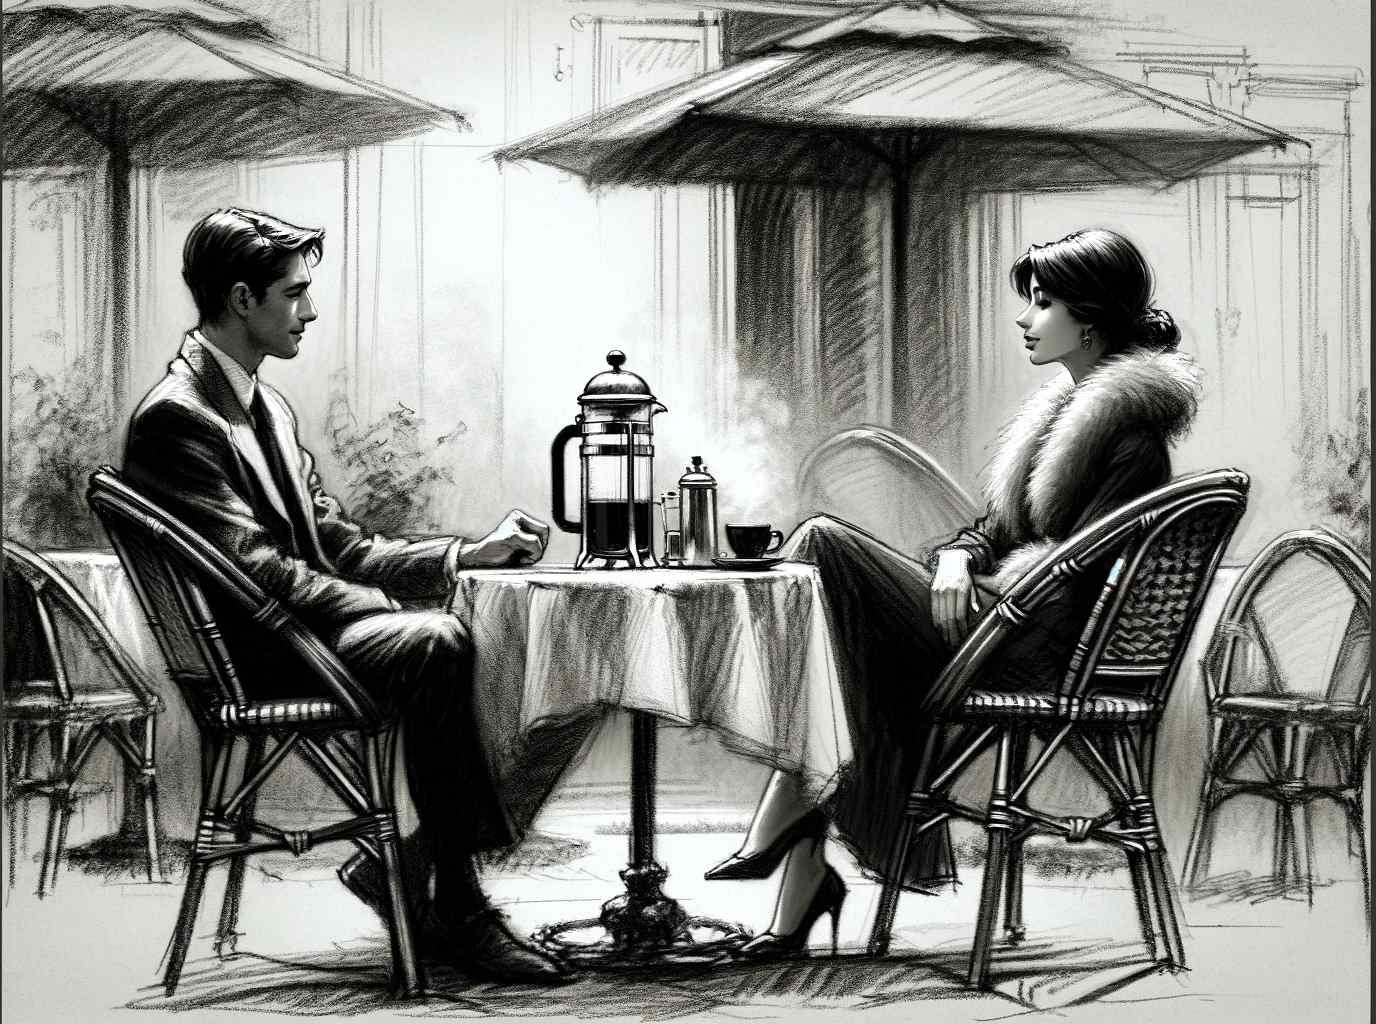 Illustration of a Couple Enjoying French Press Coffee in 1920's Paris